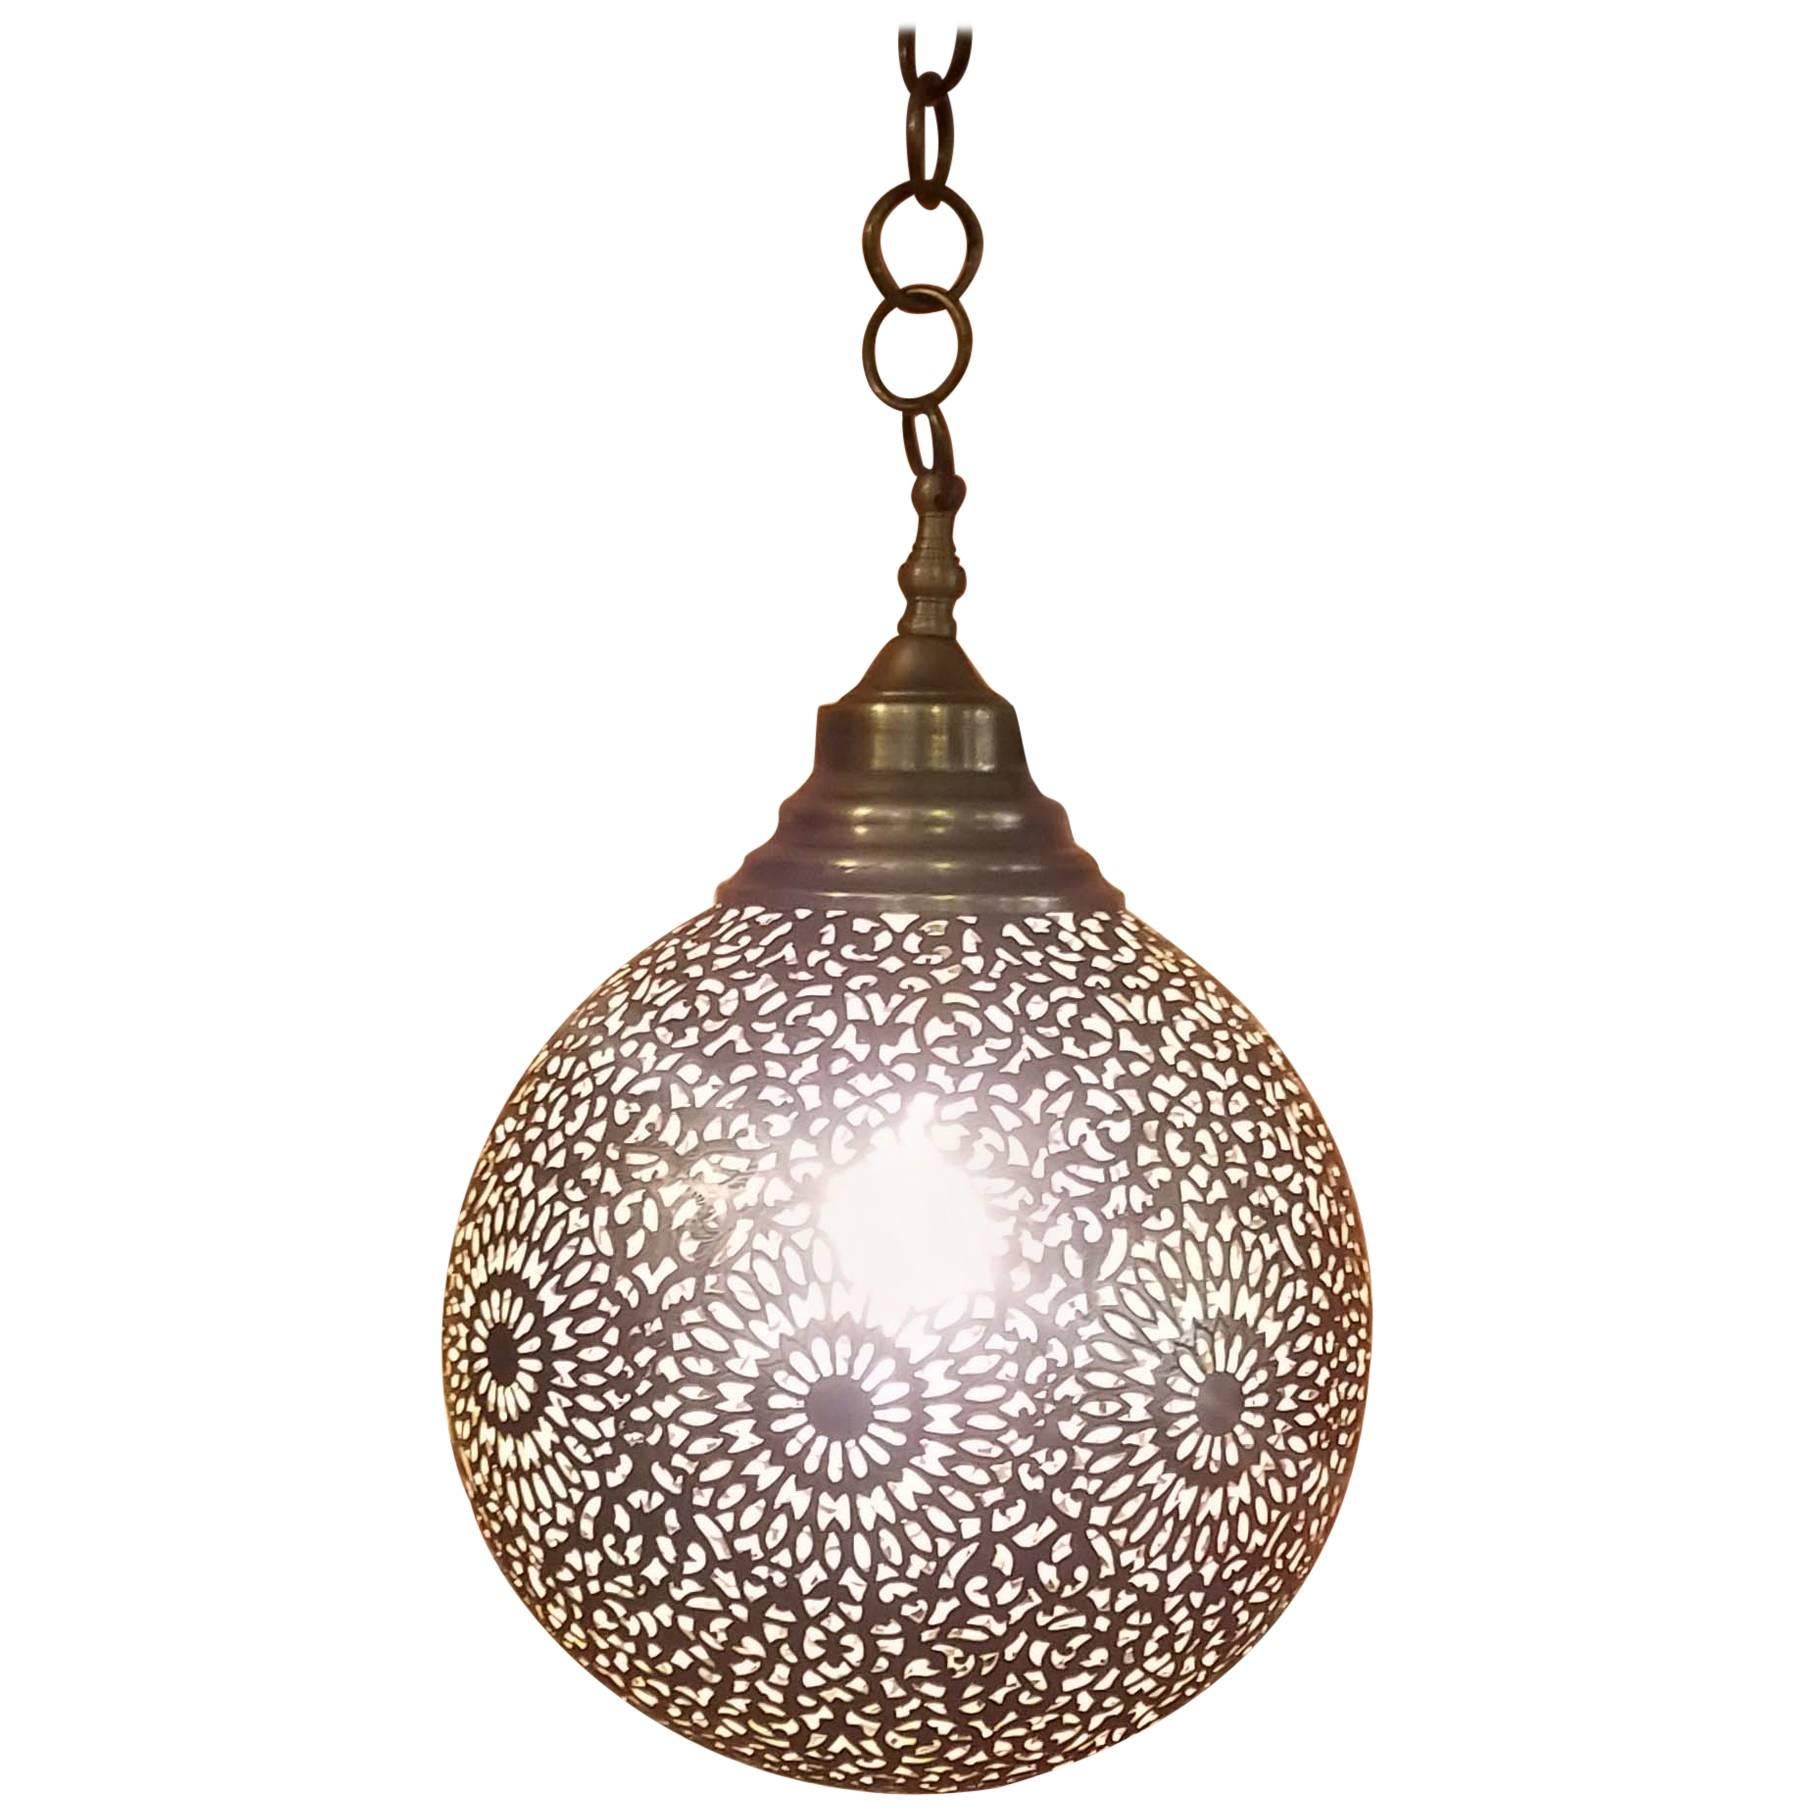 Intricate Moroccan Copper Wall or Ceiling Lamp or Lantern, Ball Shape